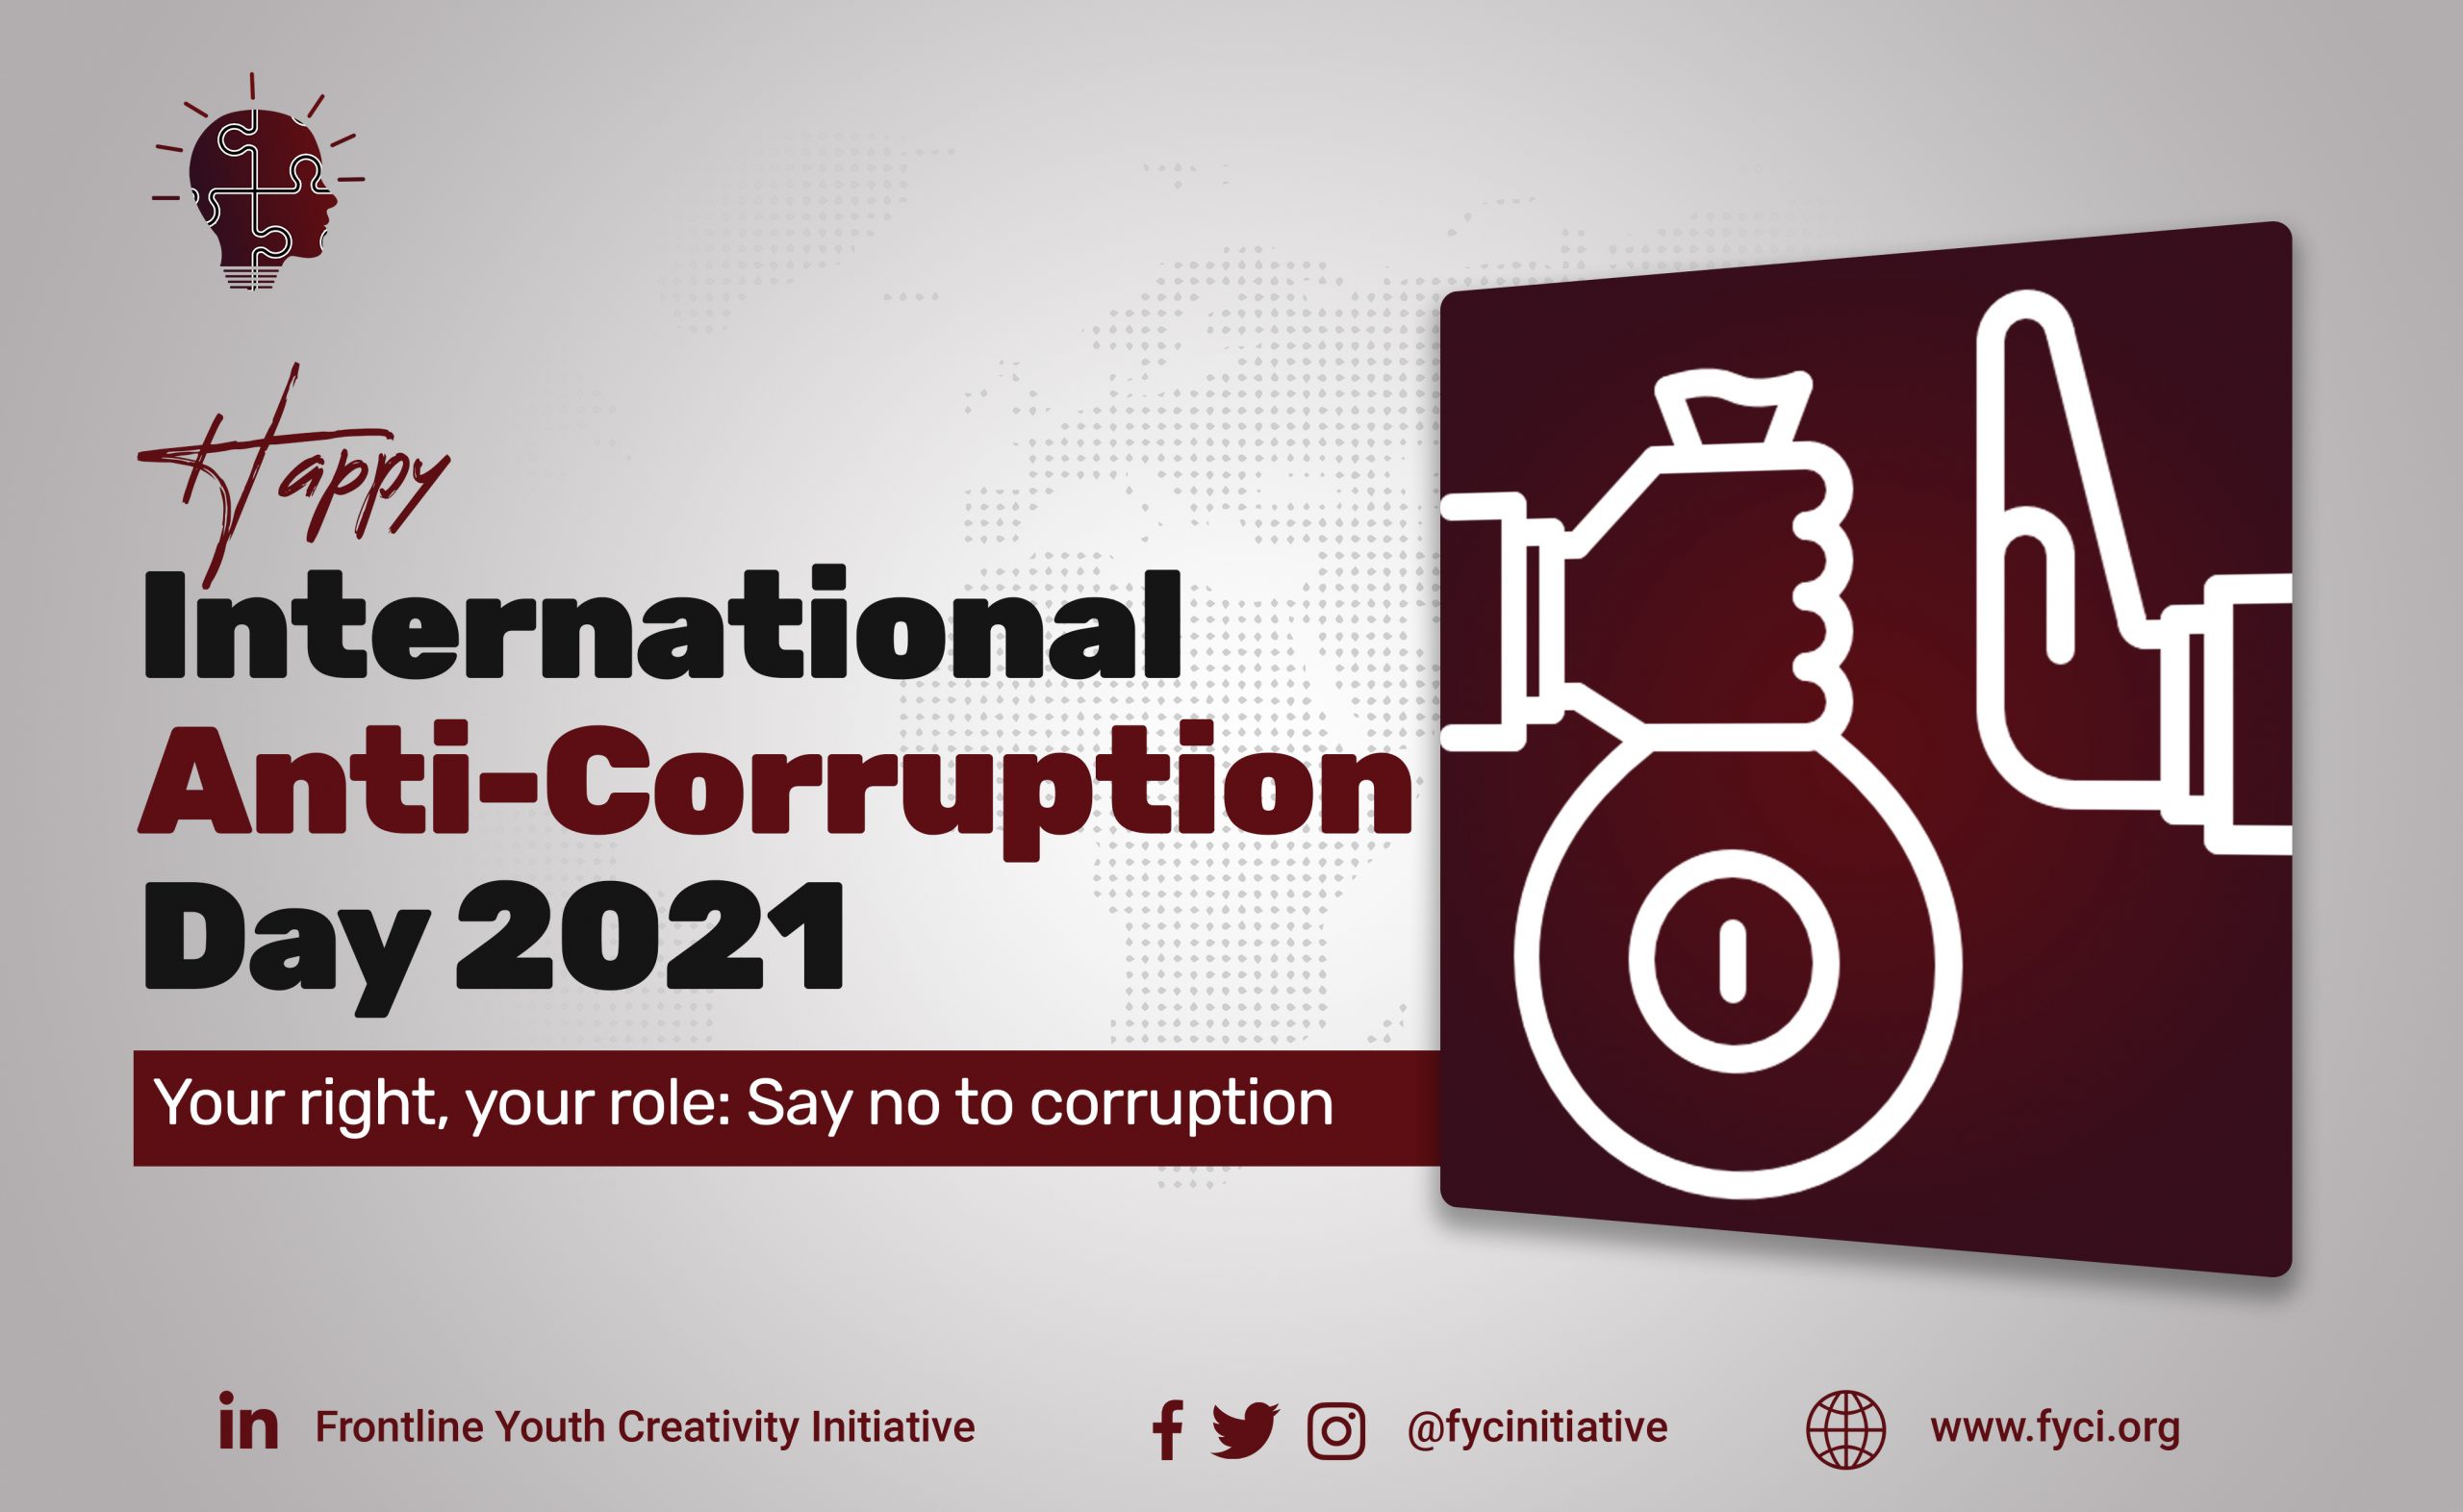 Happy International Anti-Corruption Day 2021. Your right, your role: say no to corruption.